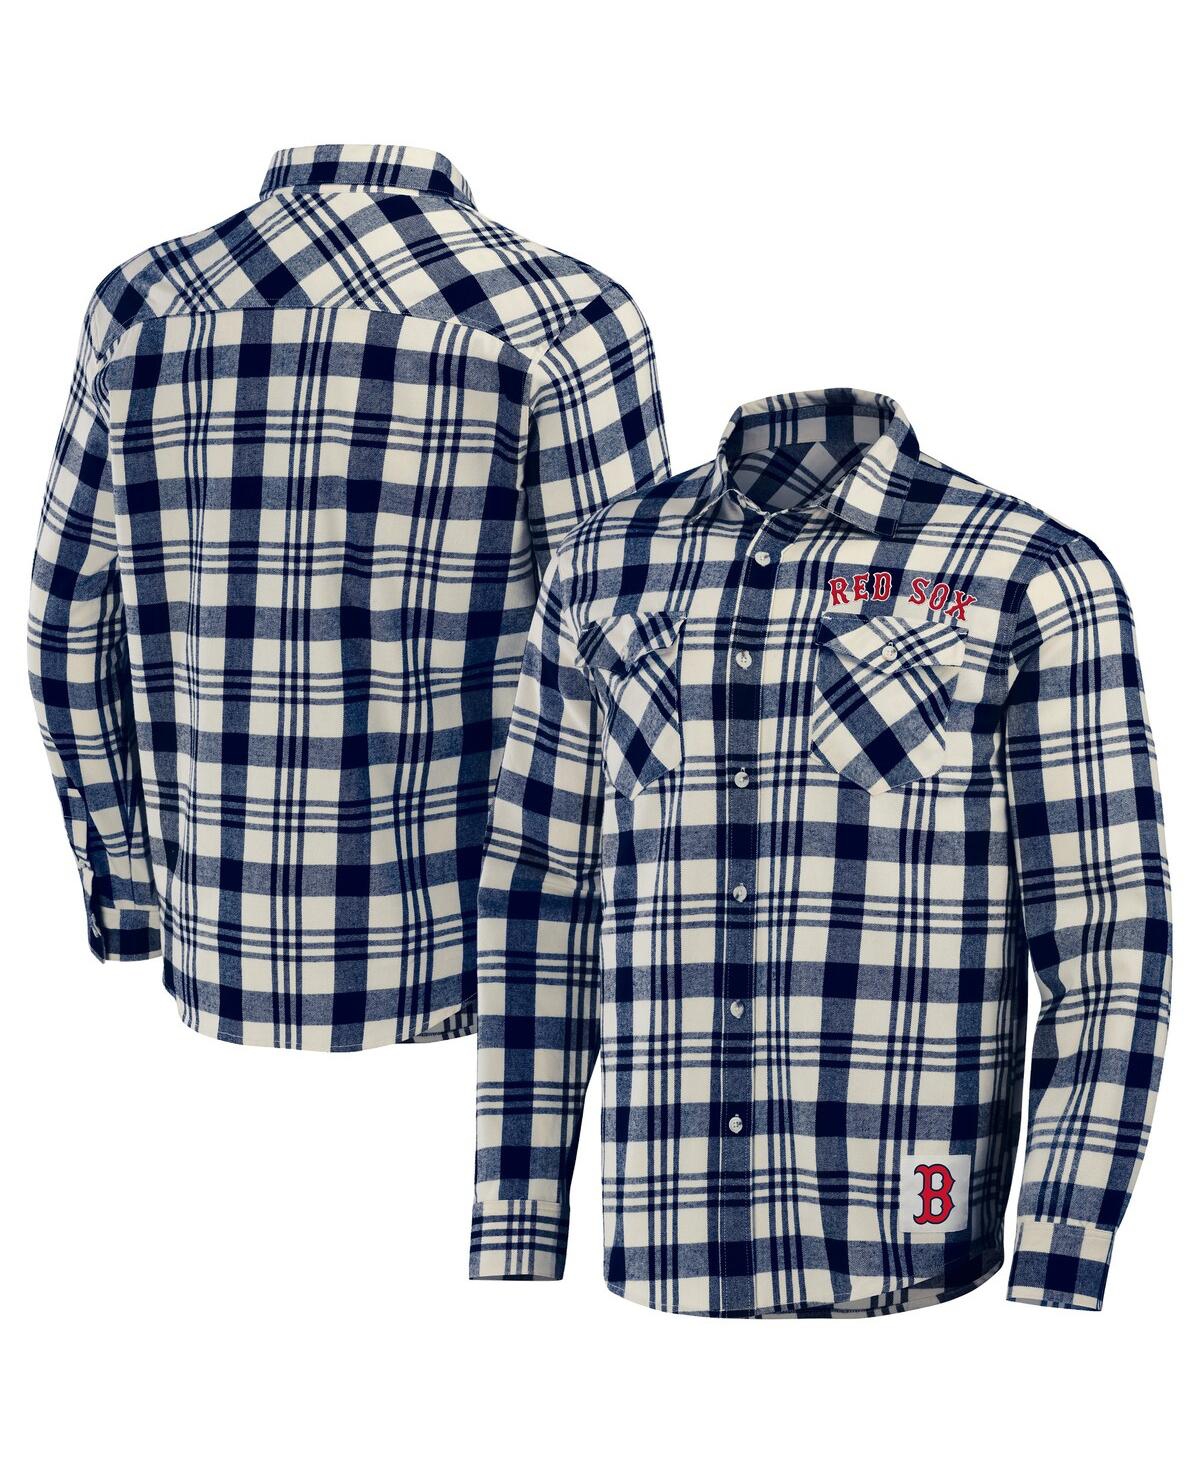 Men's Darius Rucker Collection by Fanatics Navy Boston Red Sox Plaid Flannel Button-Up Shirt - Navy